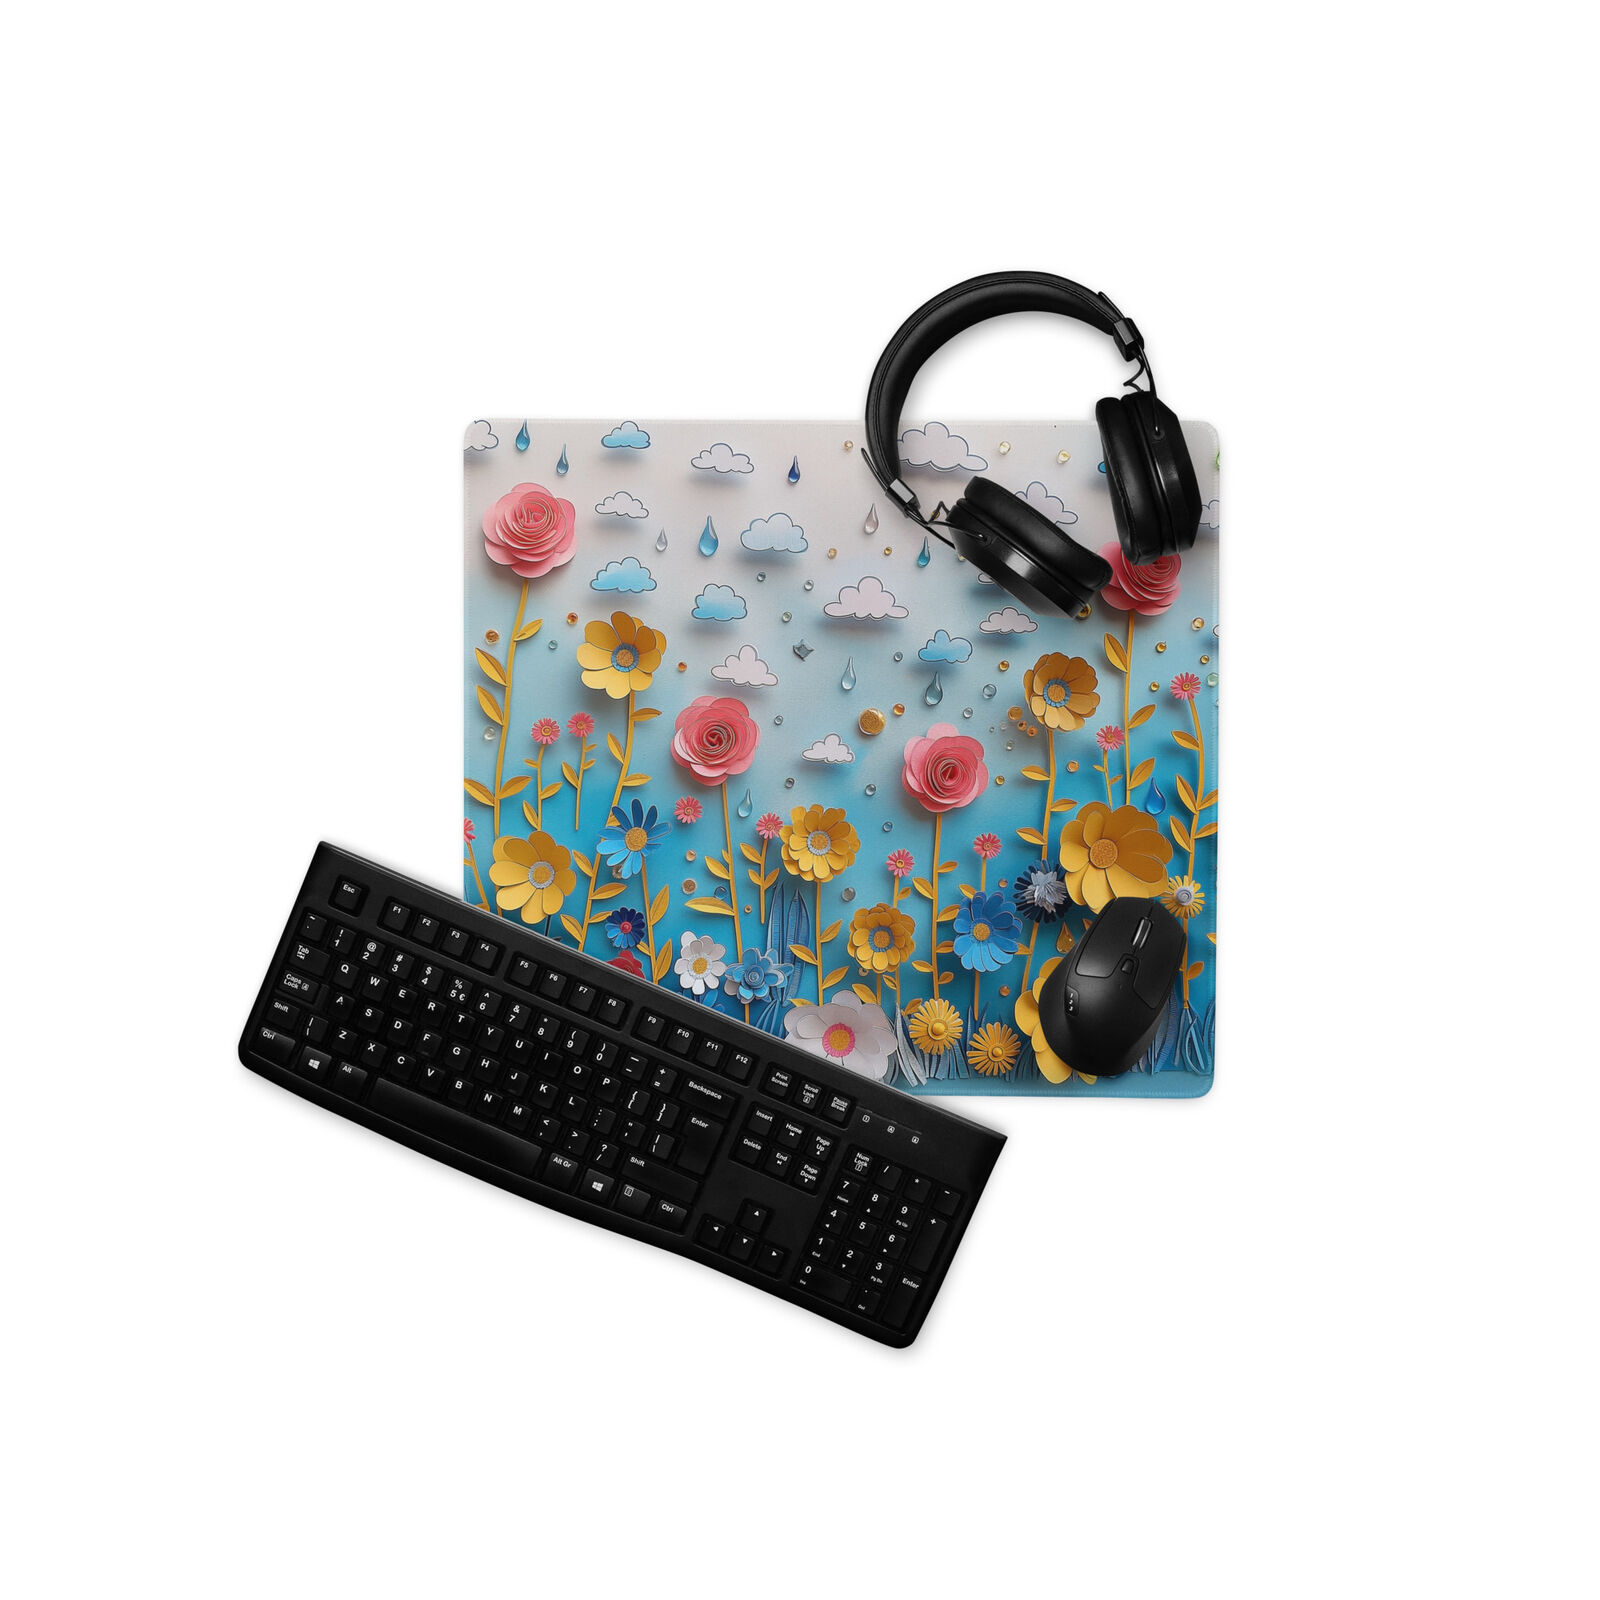 Raindrops and Flowers Gaming Mouse Pad, Floral Desk Mat, 3D Layered Paper Print